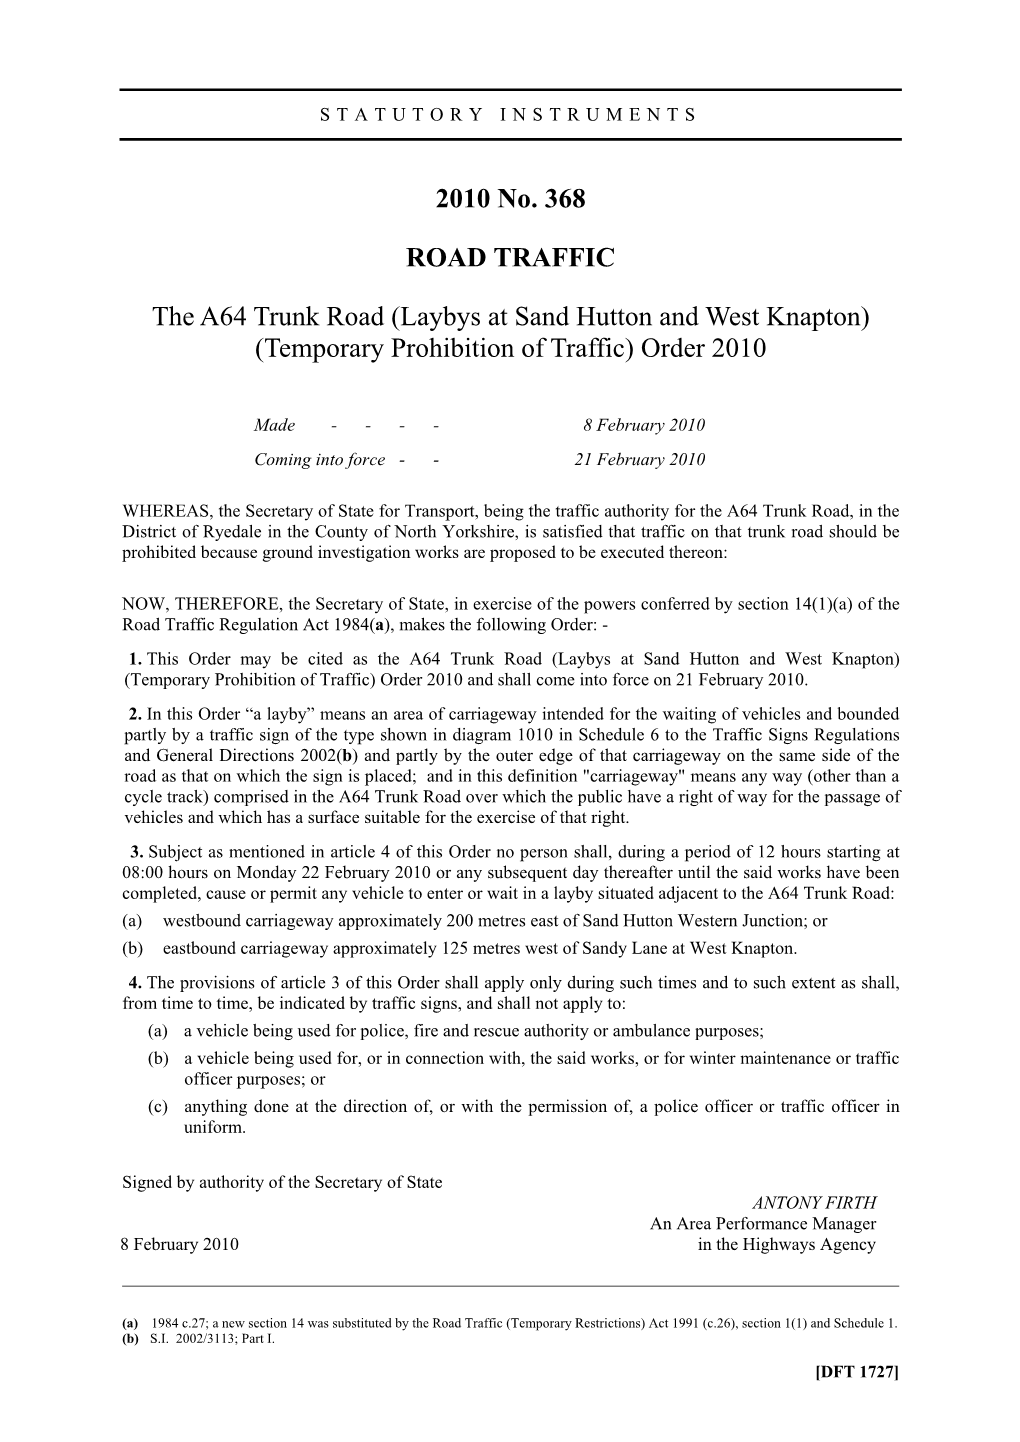 The A64 Trunk Road (Laybys at Sand Hutton and West Knapton) (Temporary Prohibition of Traffic) Order 2010